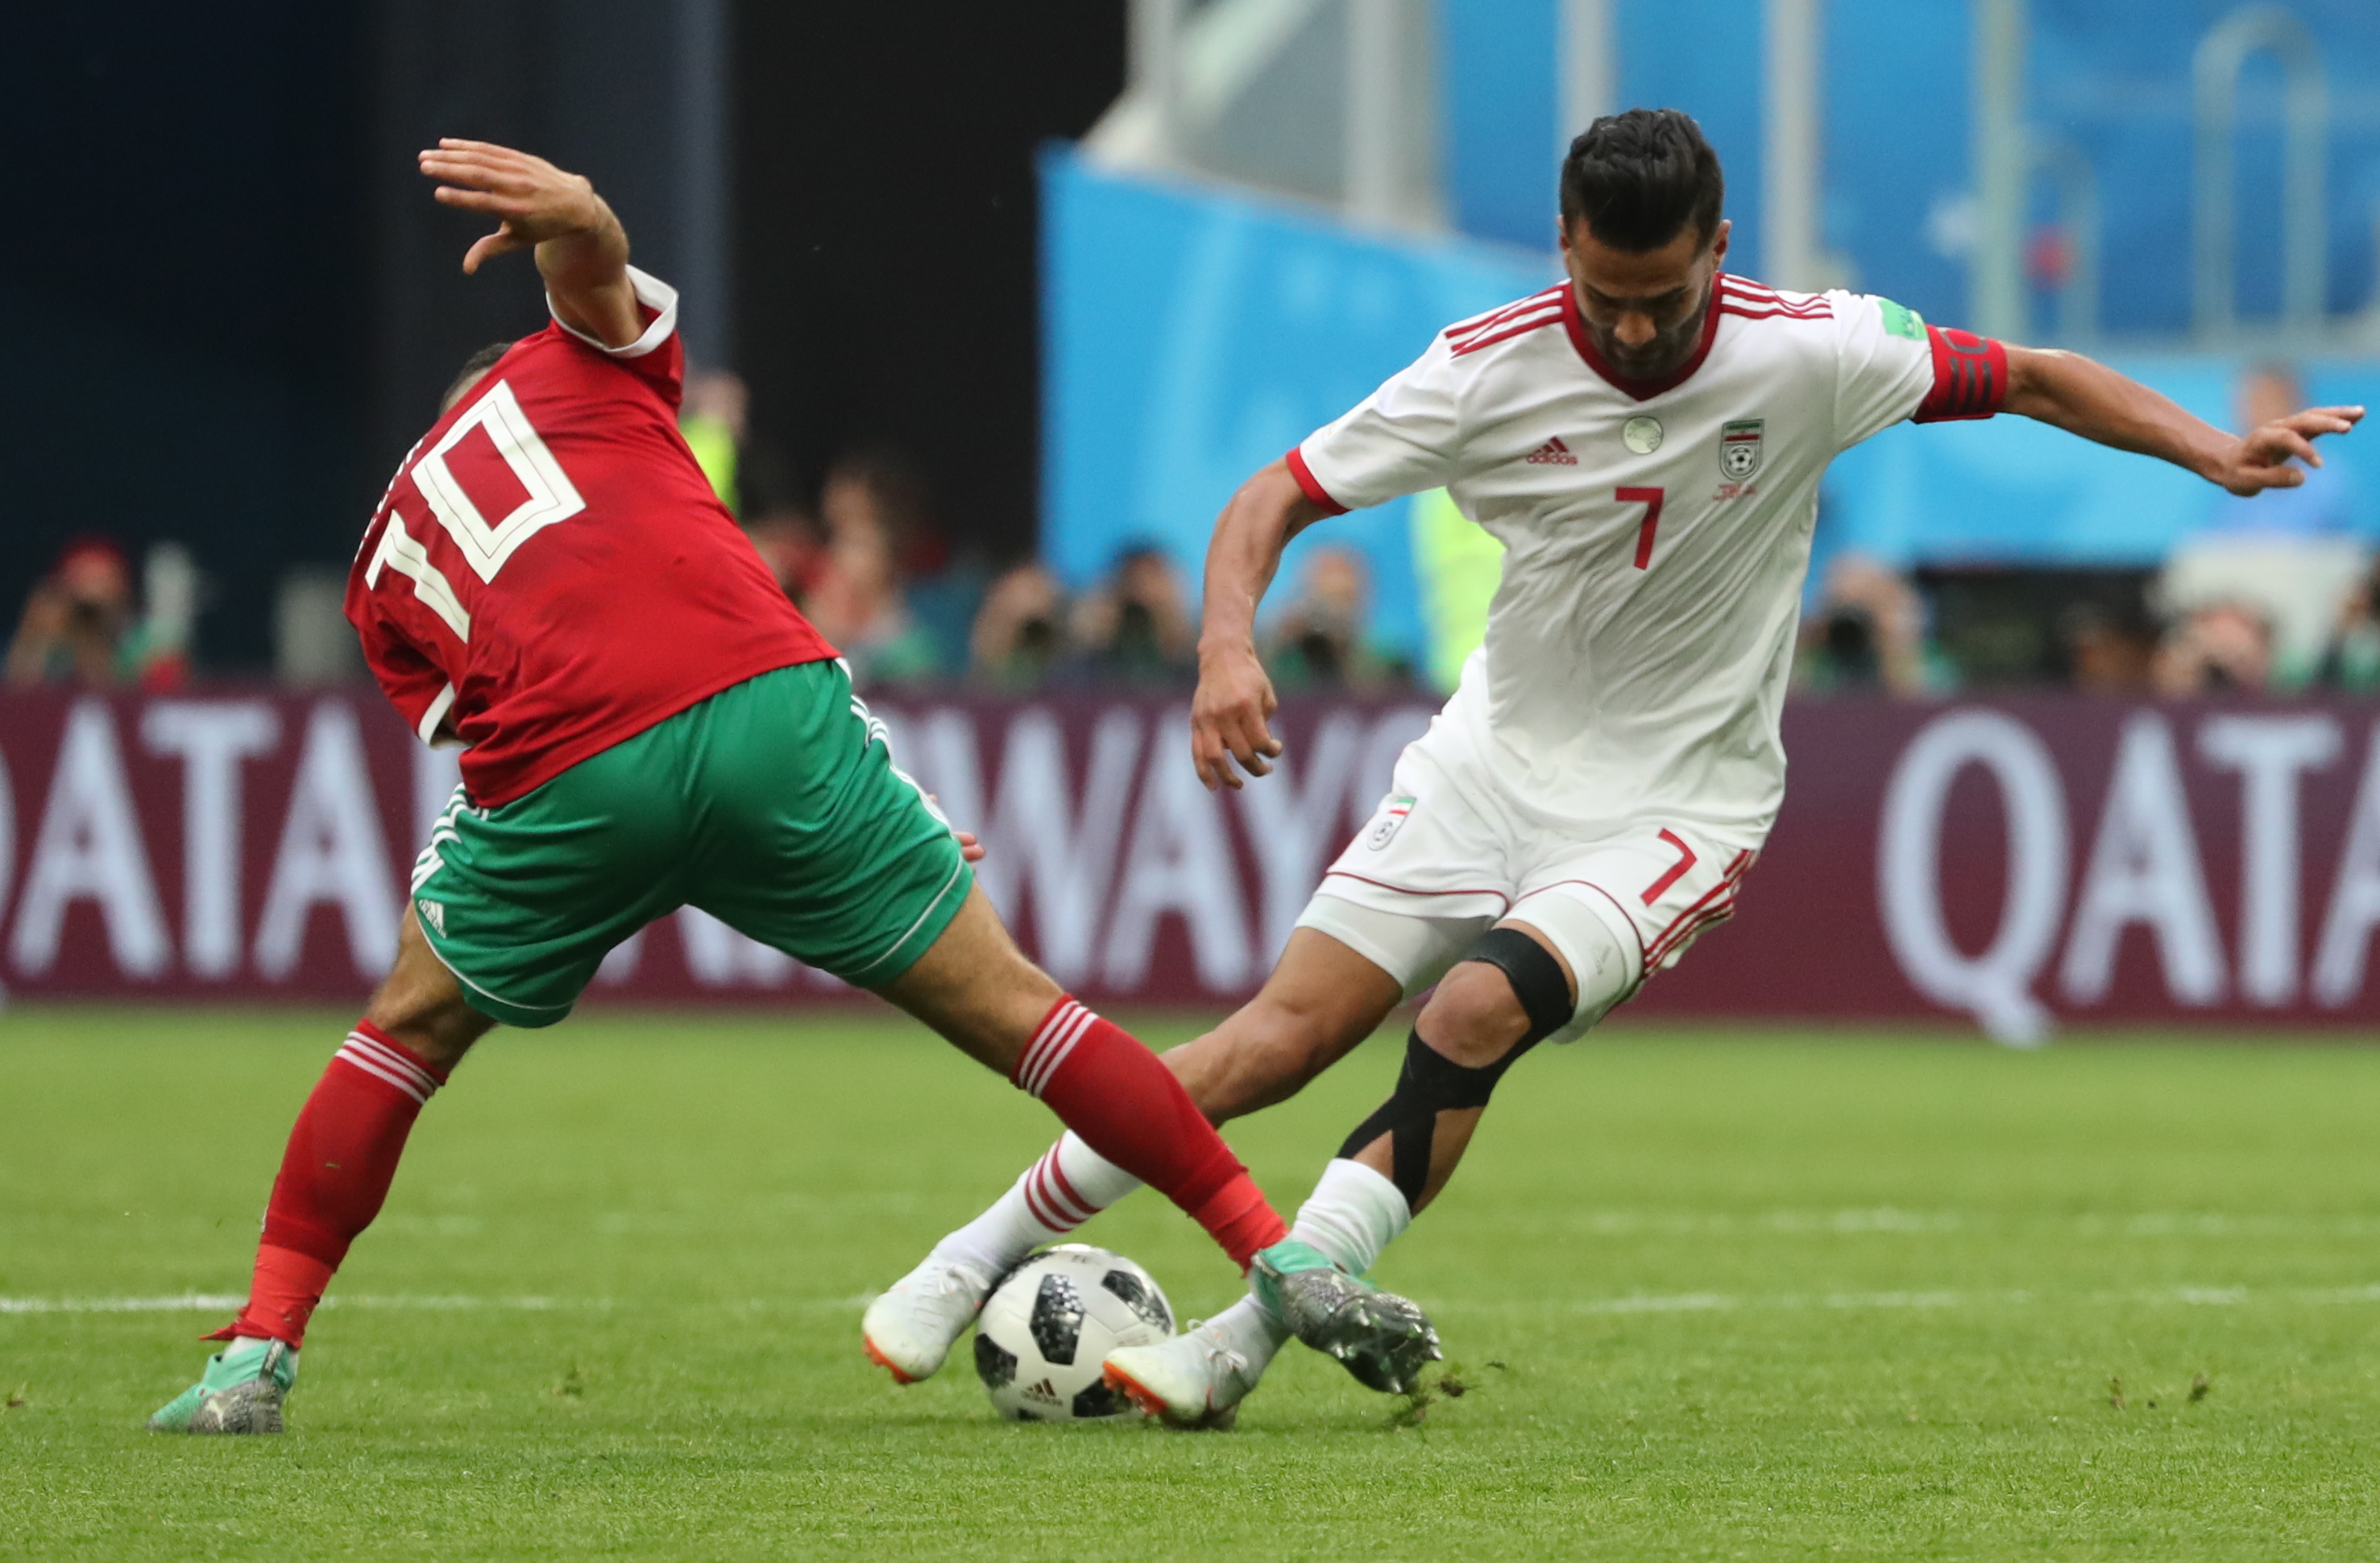 2018 FIFA World Cup: 1st Stage Group B match Morocco 0 - 1 Iran